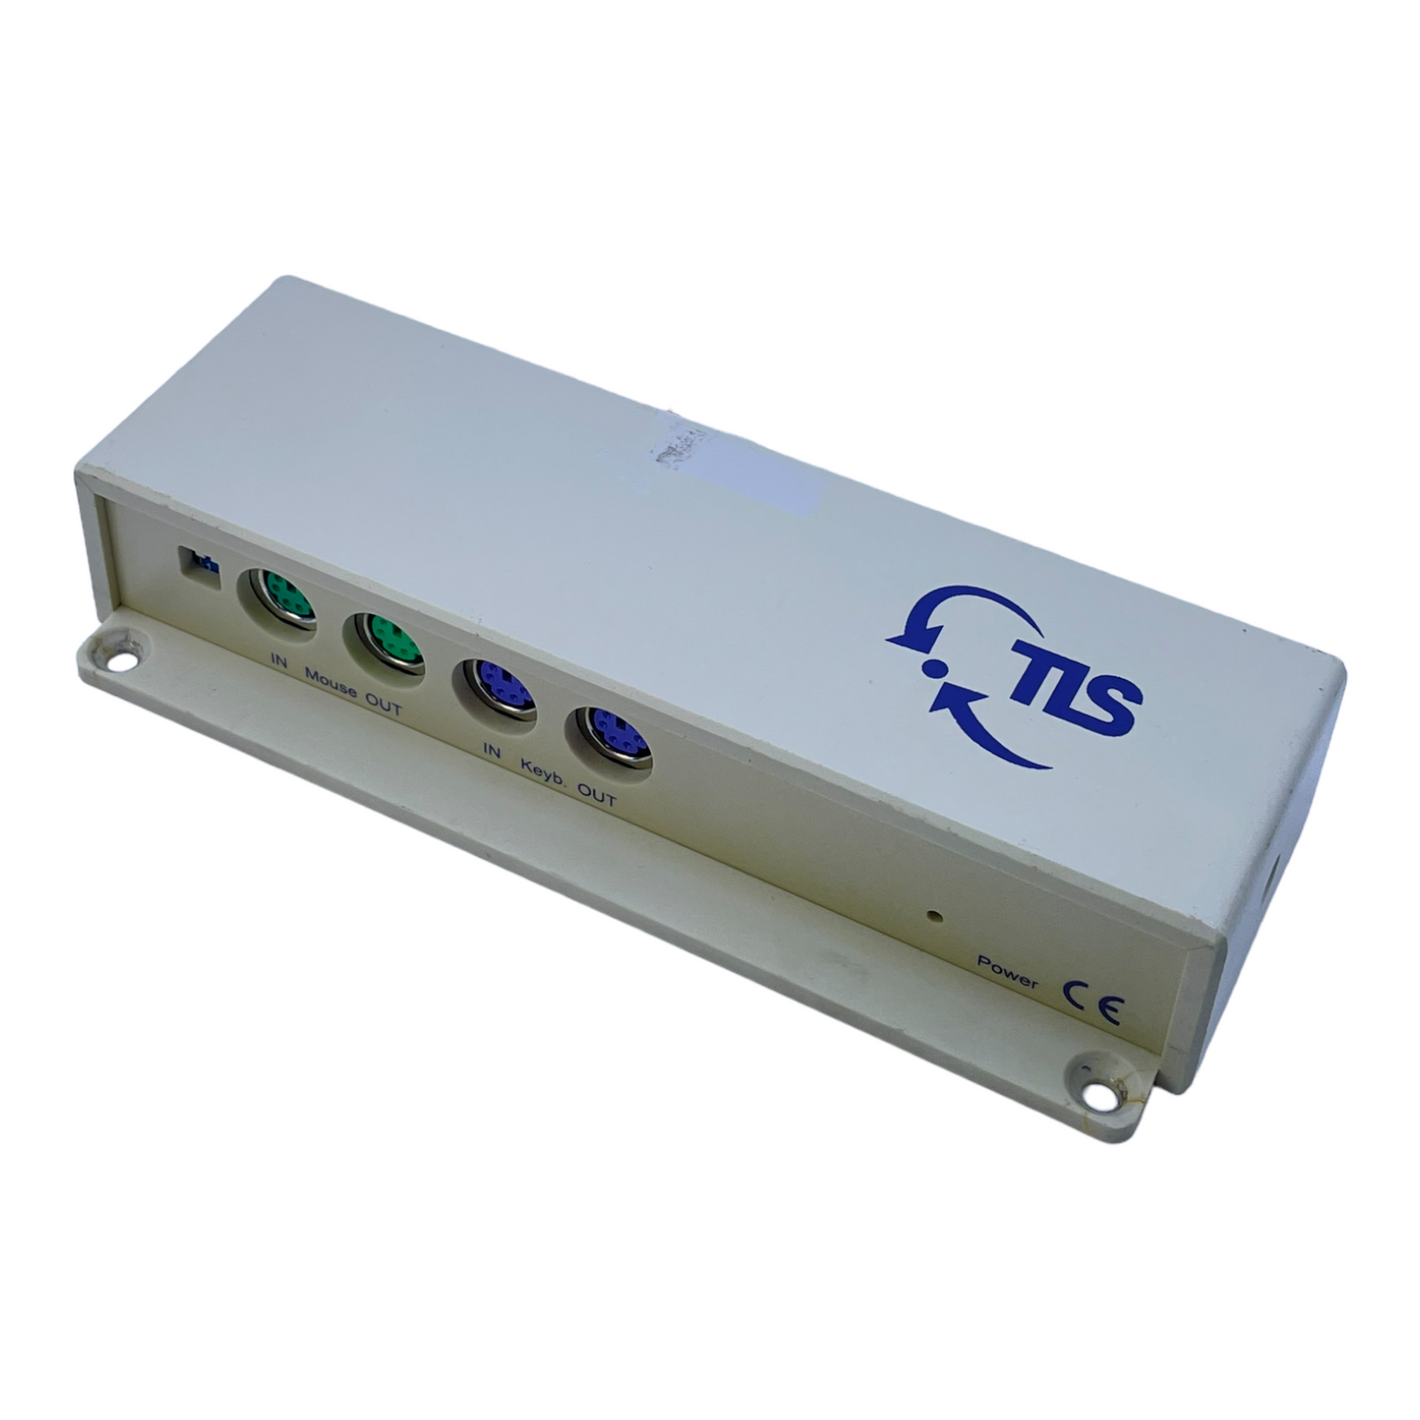 TLS PS/2 cable amplifier for industrial use Cable Amplifier PS/2 TLS